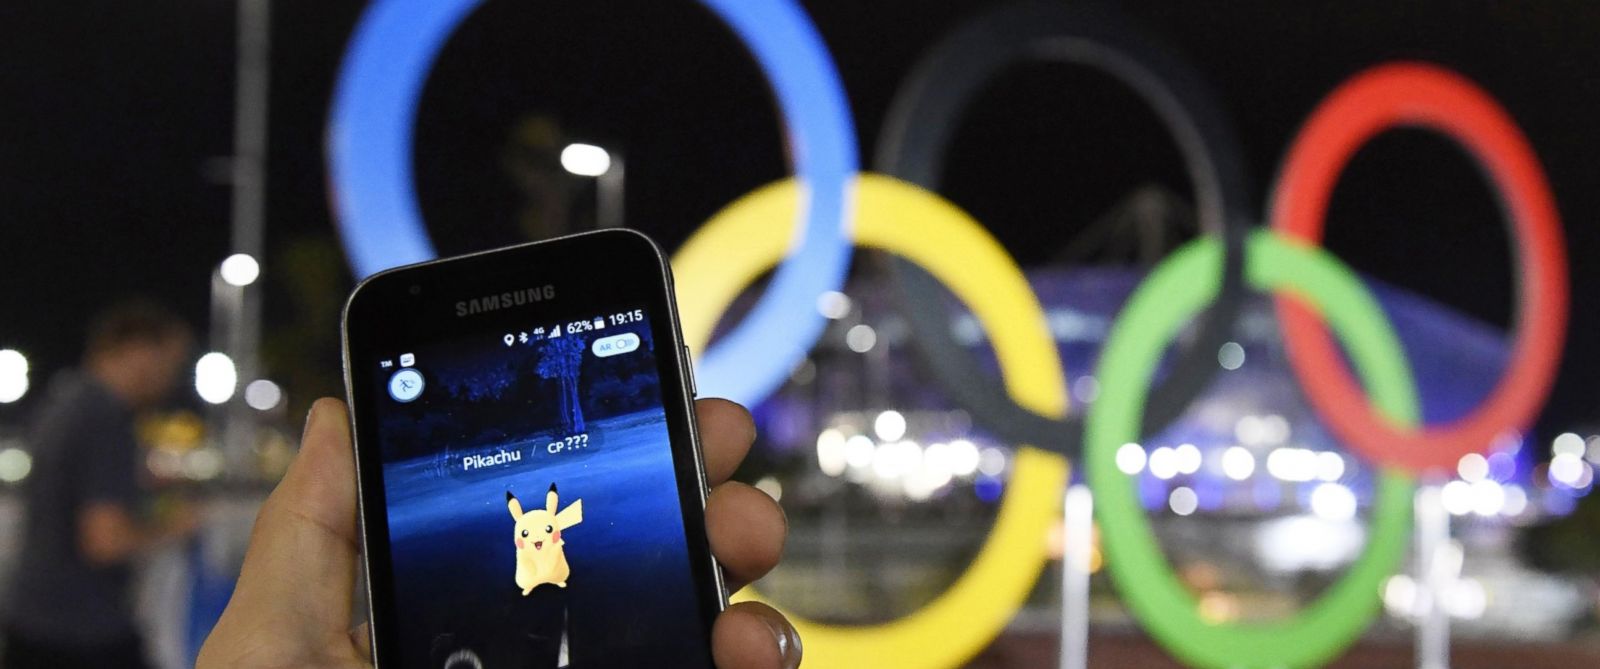 Pokemon-Go-Launches-in-Brazil-Ahead-of-Olympics